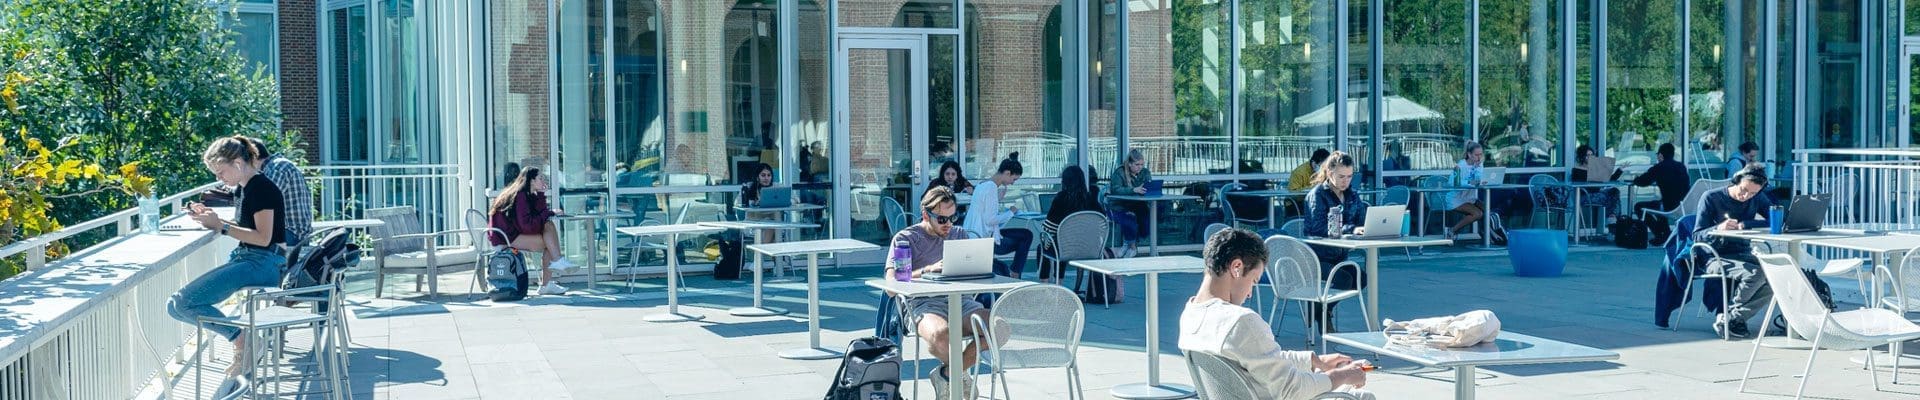 students studying outside on Brody Learning Commons terrace